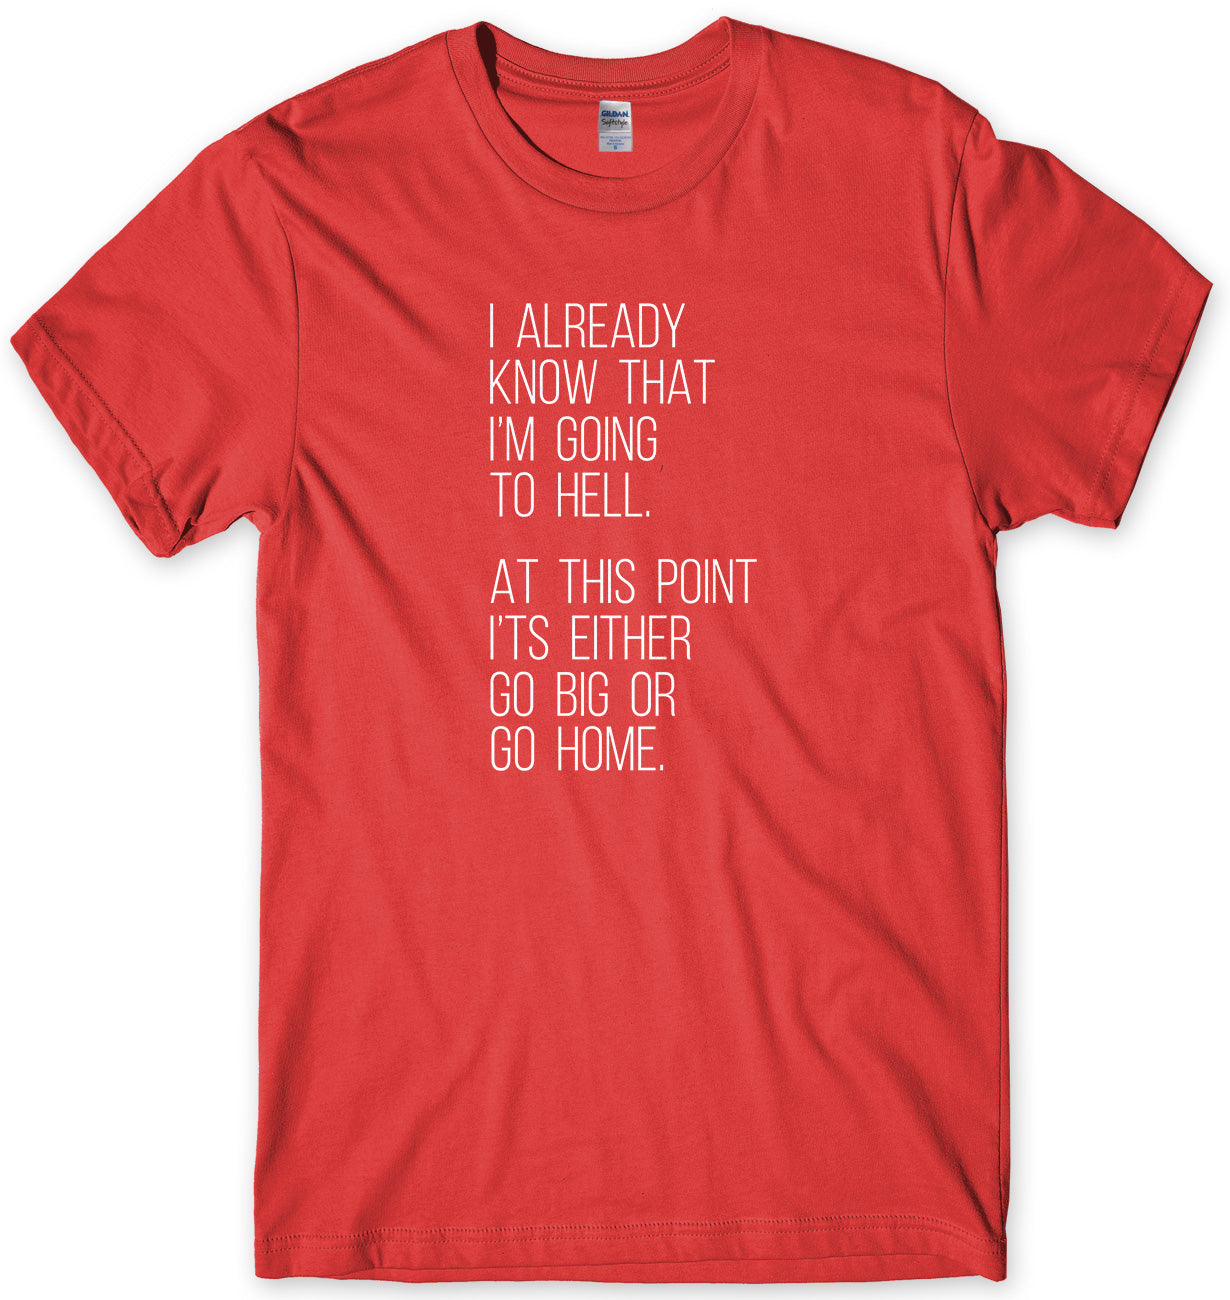 I Already Know That I'm Going To Hell, At This Point It's Either Go Big Or Go Home Mens Unisex T-Shirt